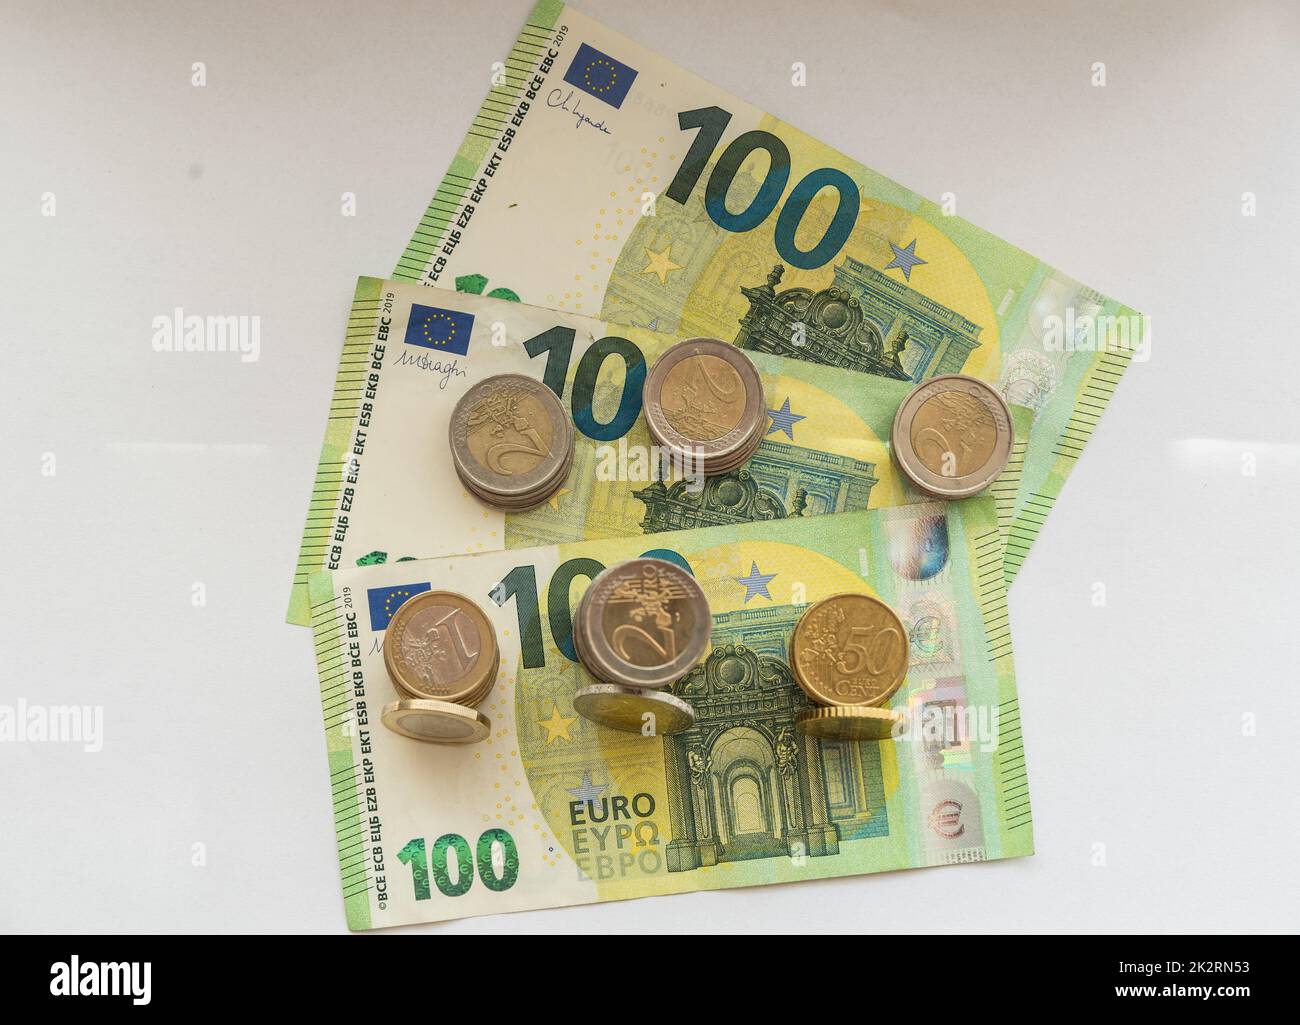 Paper money and coin - euro currency, banknotes and euro coin Stock Photo